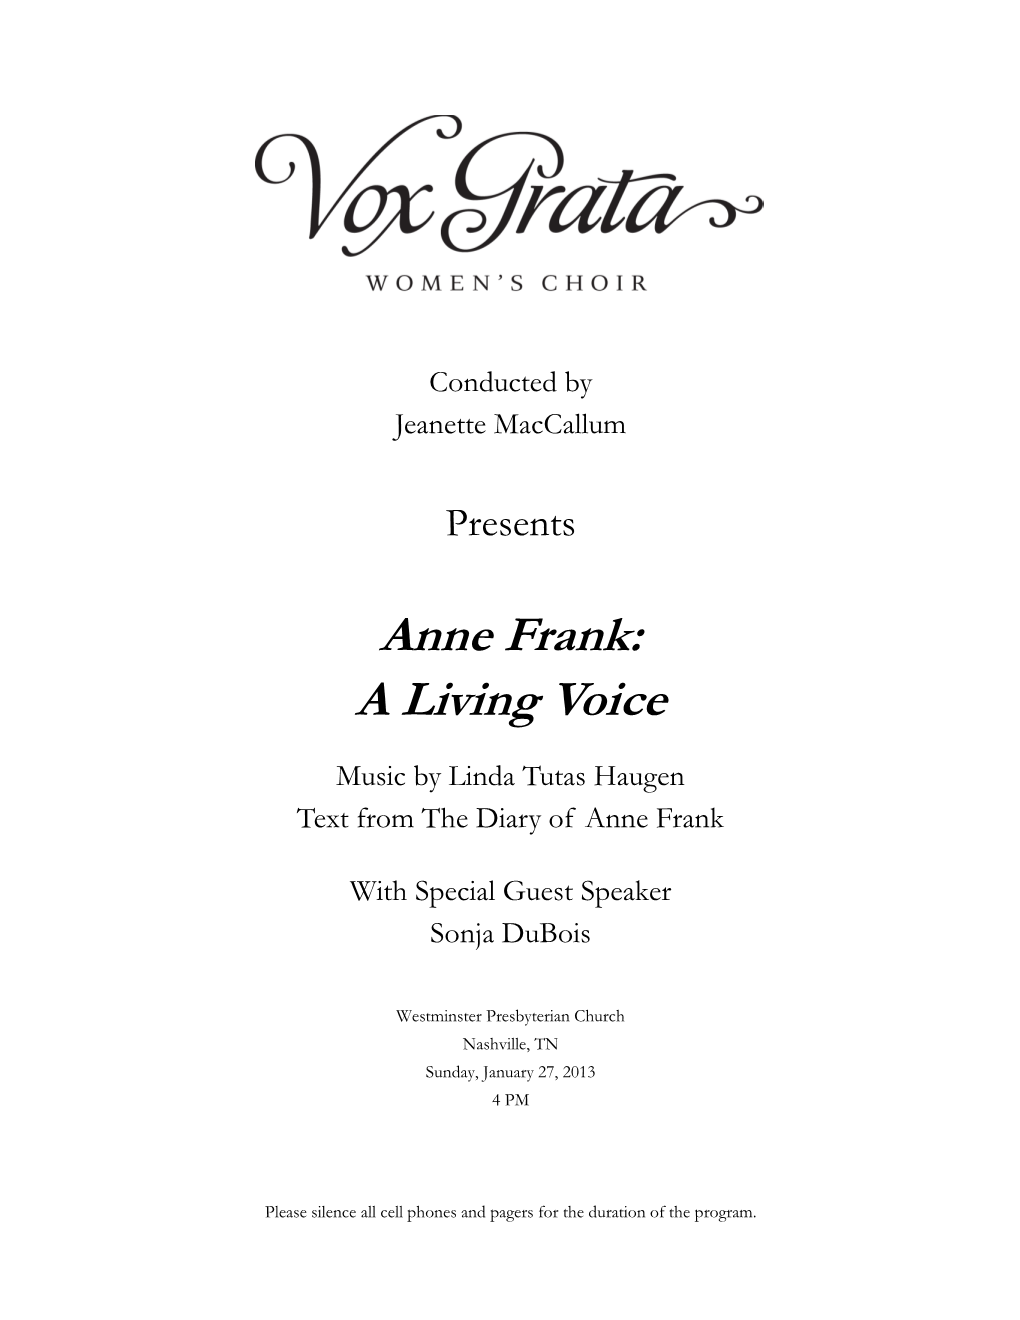 Anne Frank: a Living Voice